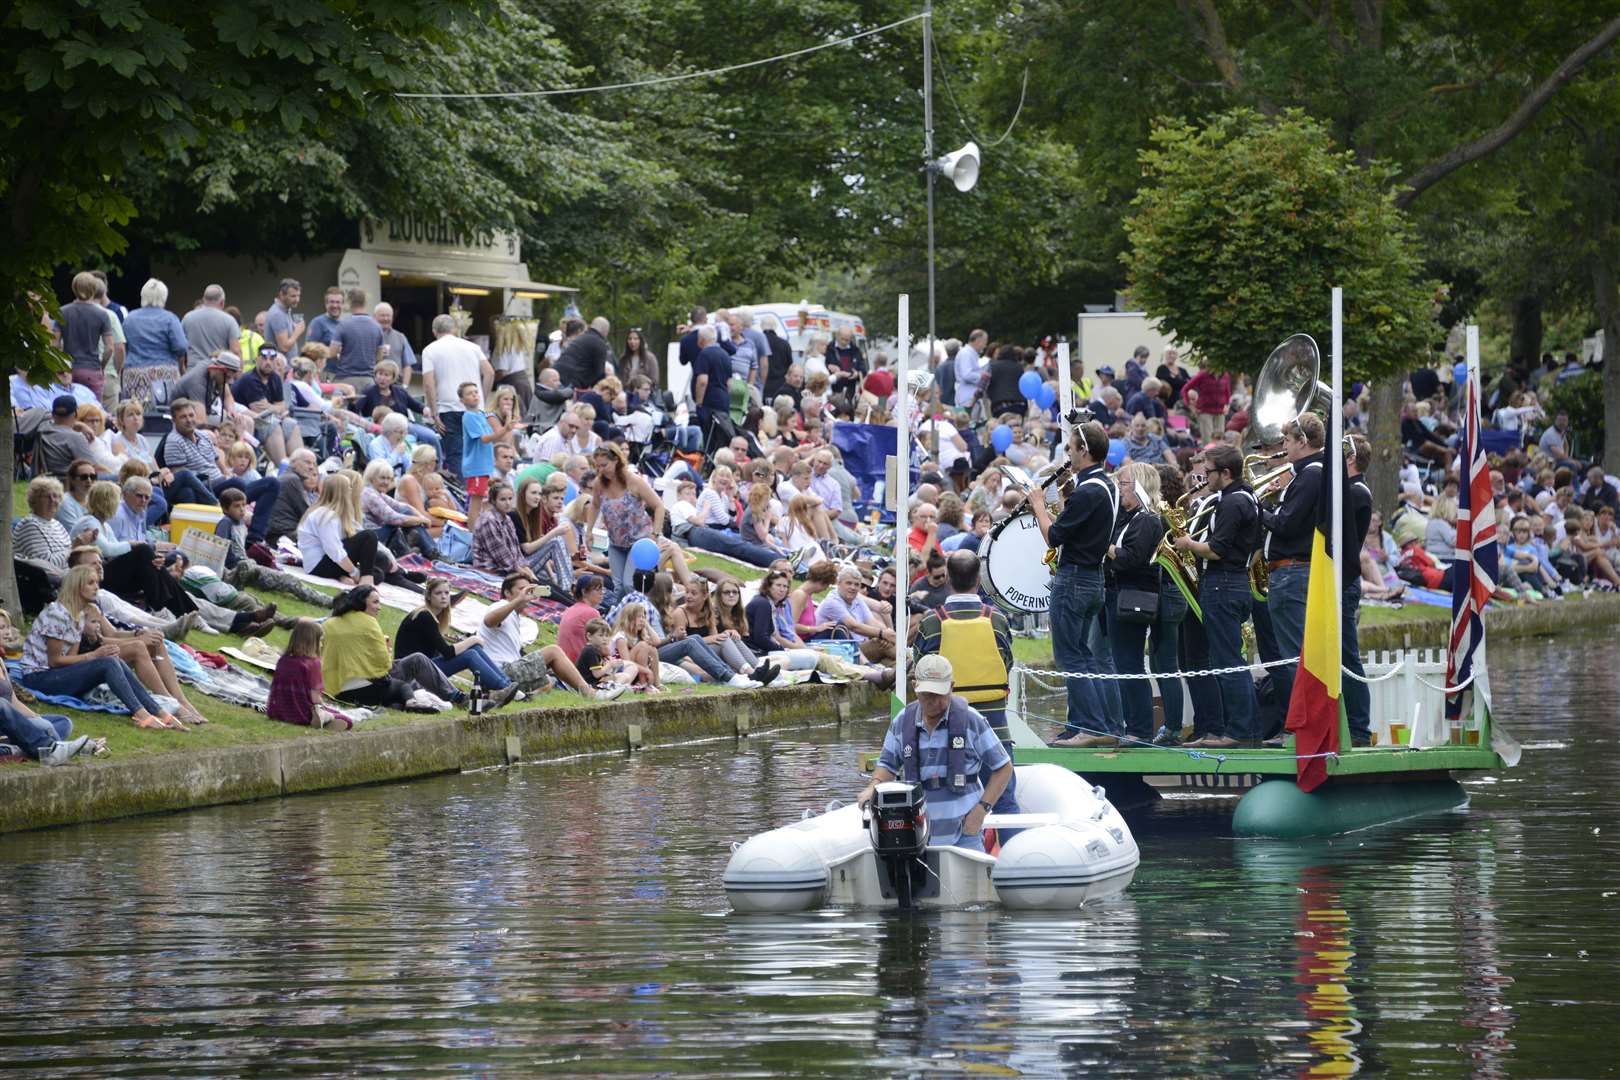 Visitors flock to the banks of the canal to enjoy the fete